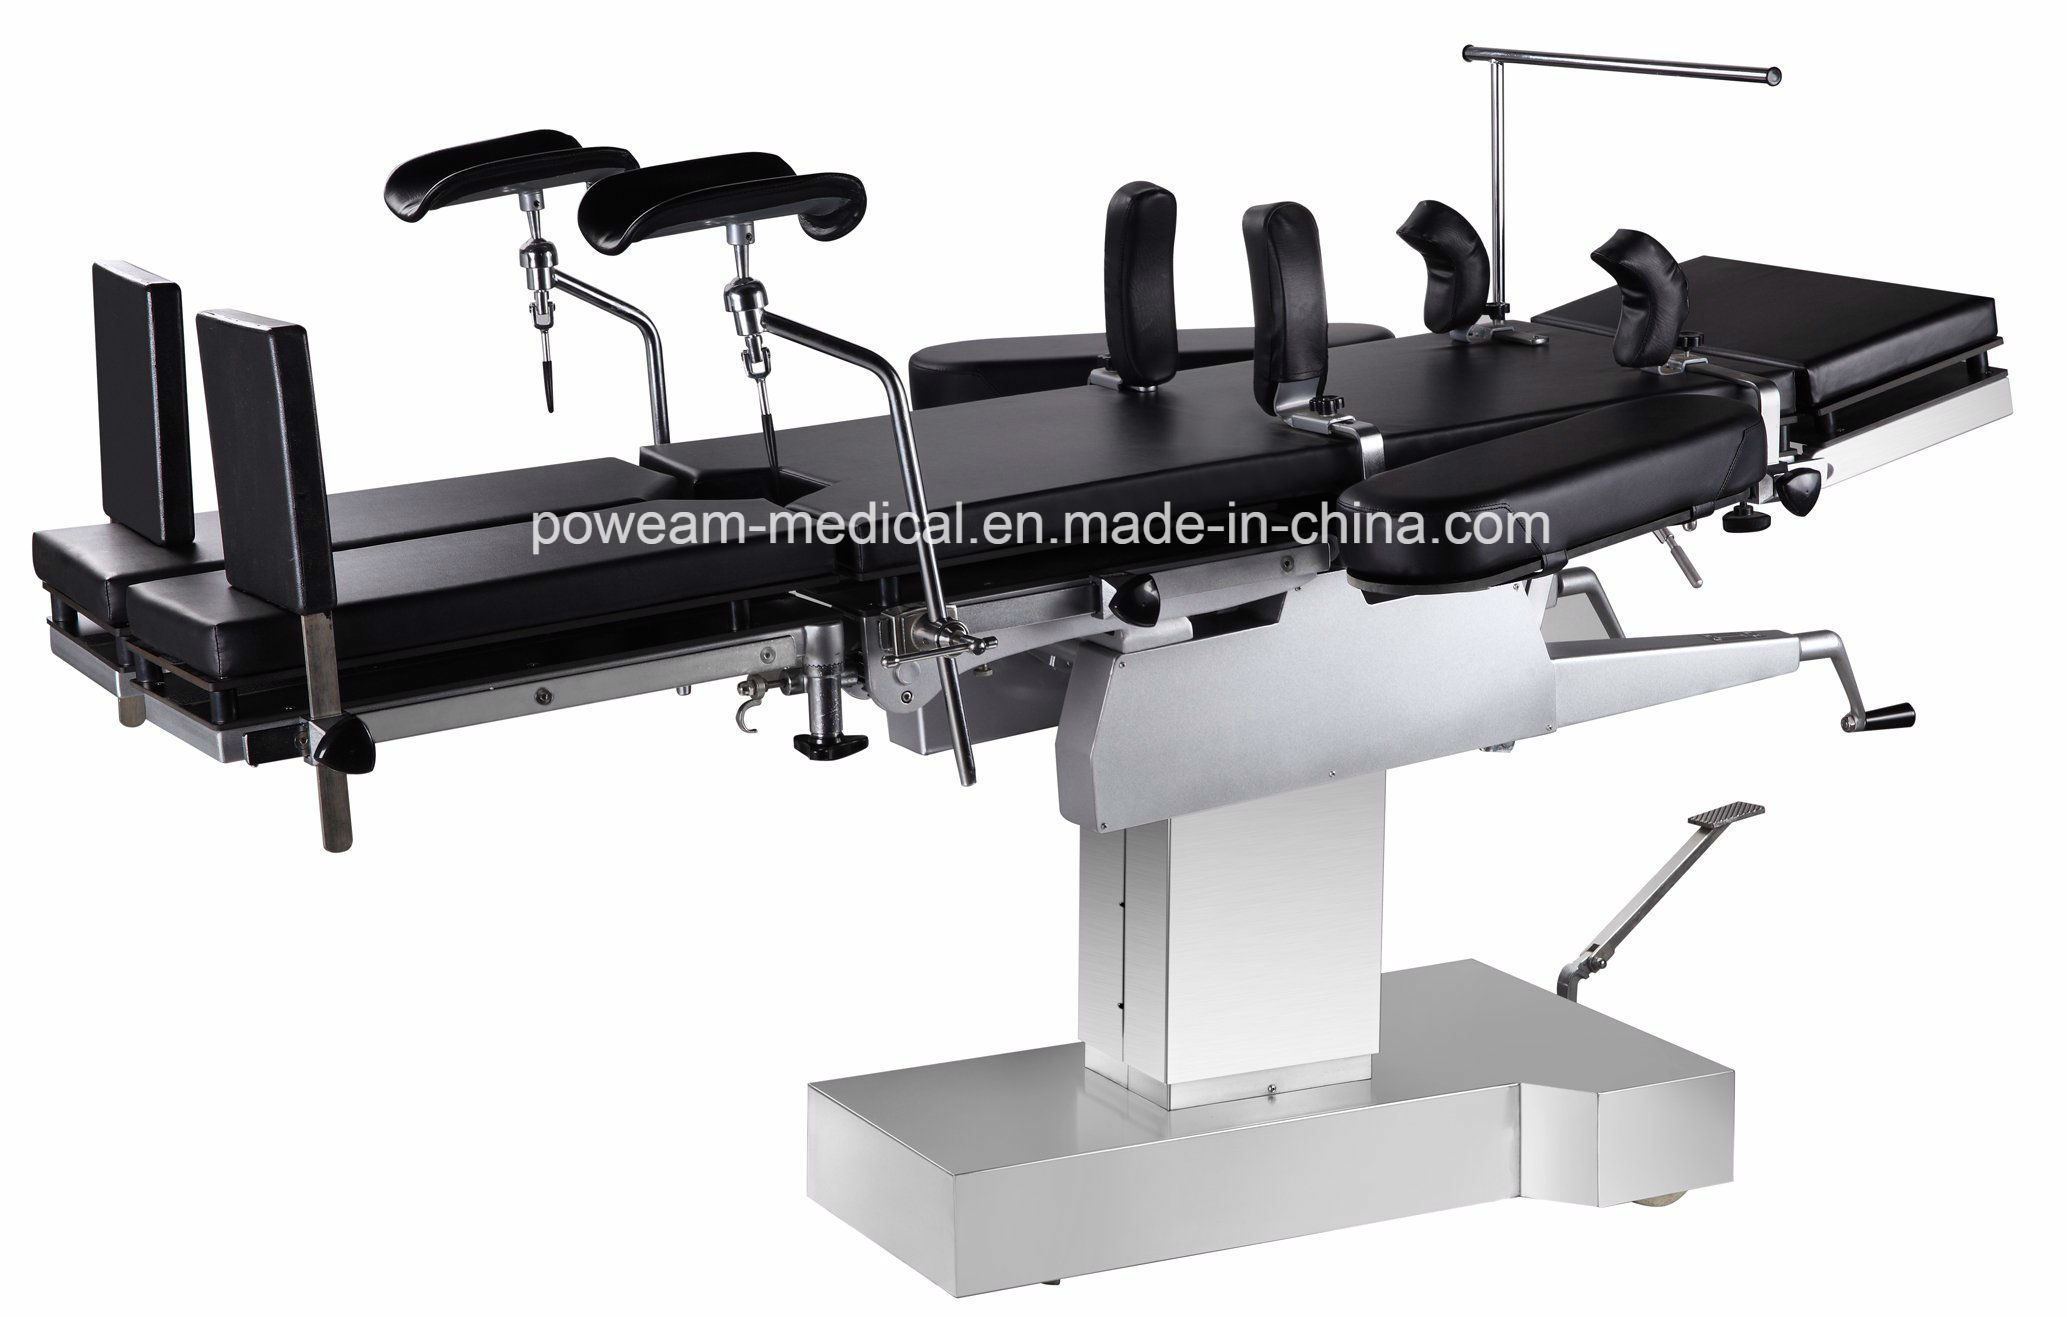 Operting Table at Discount Price Hydraulic Operating Table